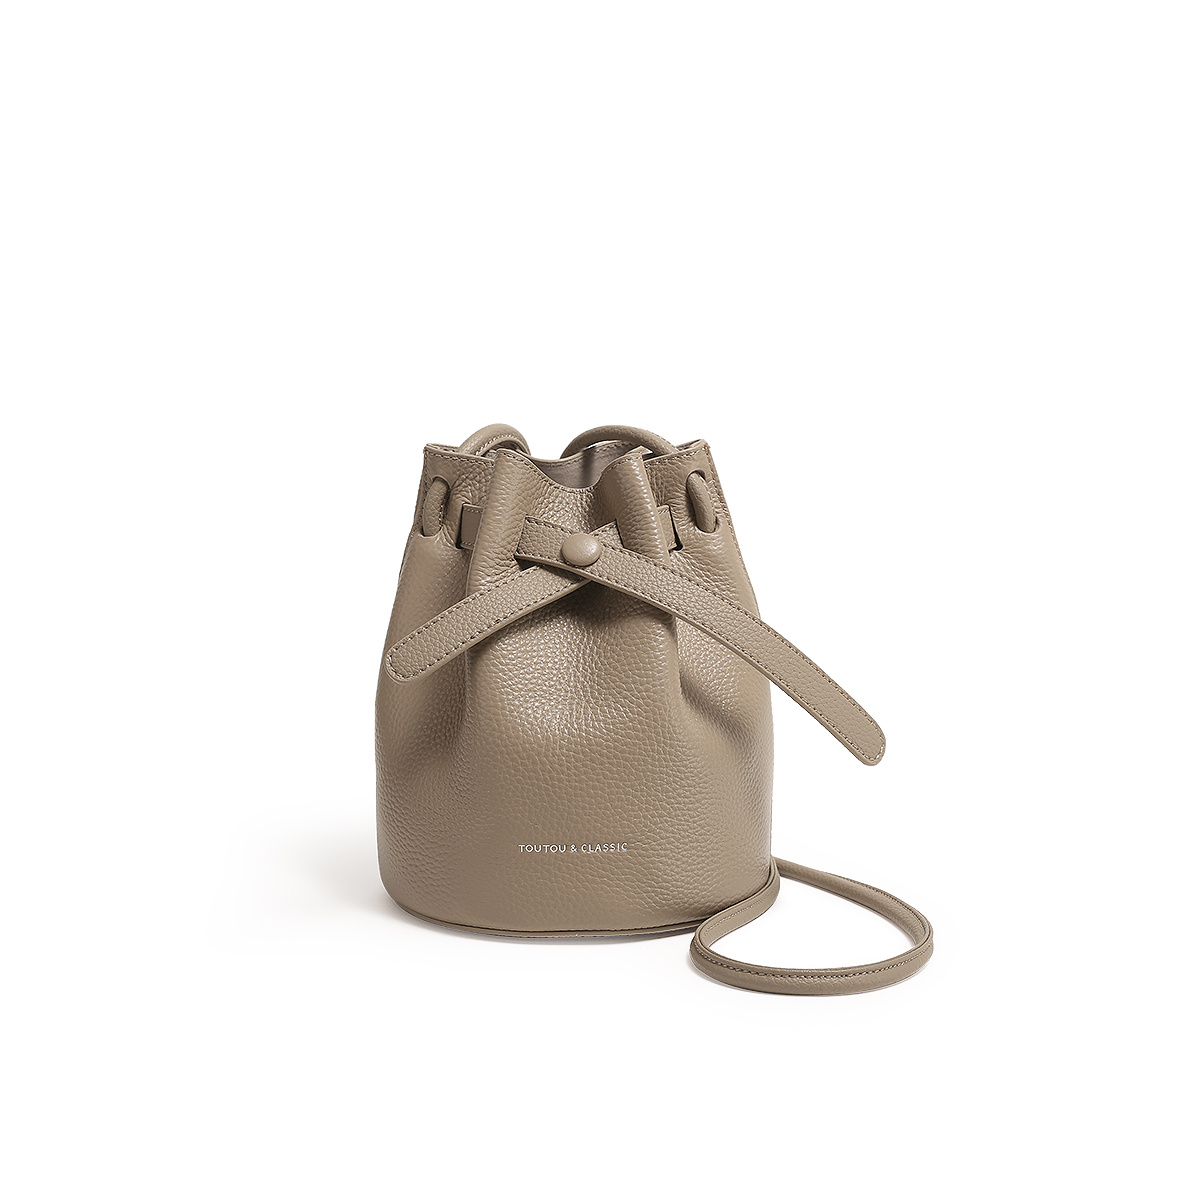 Toutou Classic Style Bucket Bag Fashion Leather Crossbody Bag Mini Drawstring  Purse For Women 5 91inch 5 91inch 7 68inch, Don't Miss These Great Deals